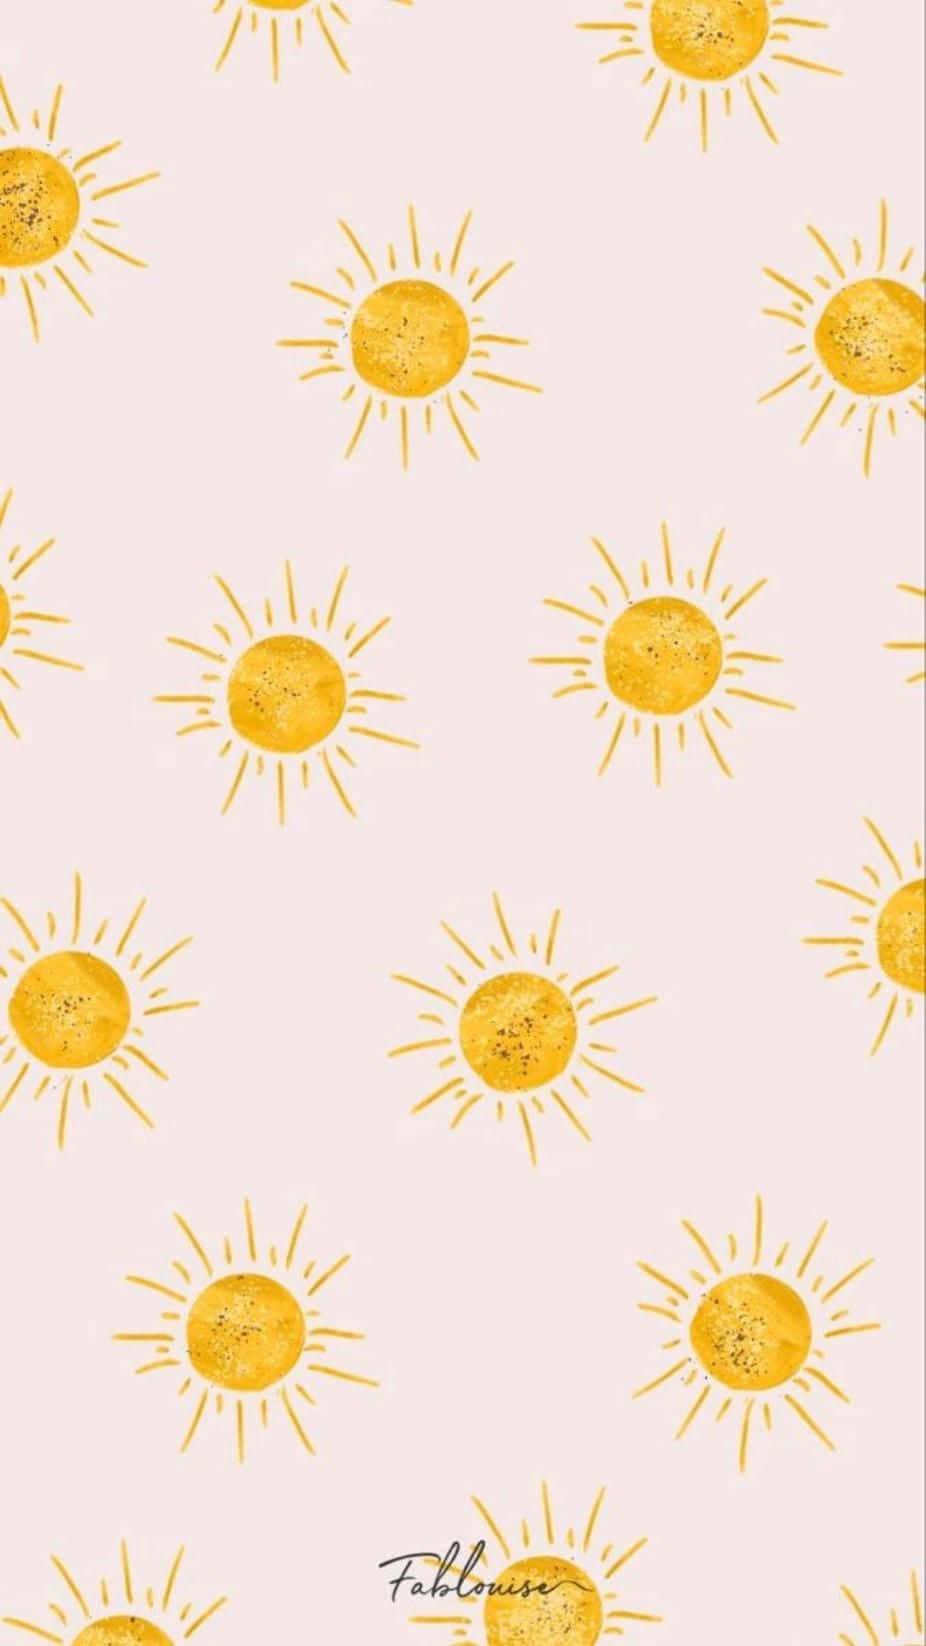 Download Brighten Up Your Day with a Cute Sun Wallpaper  Wallpaperscom